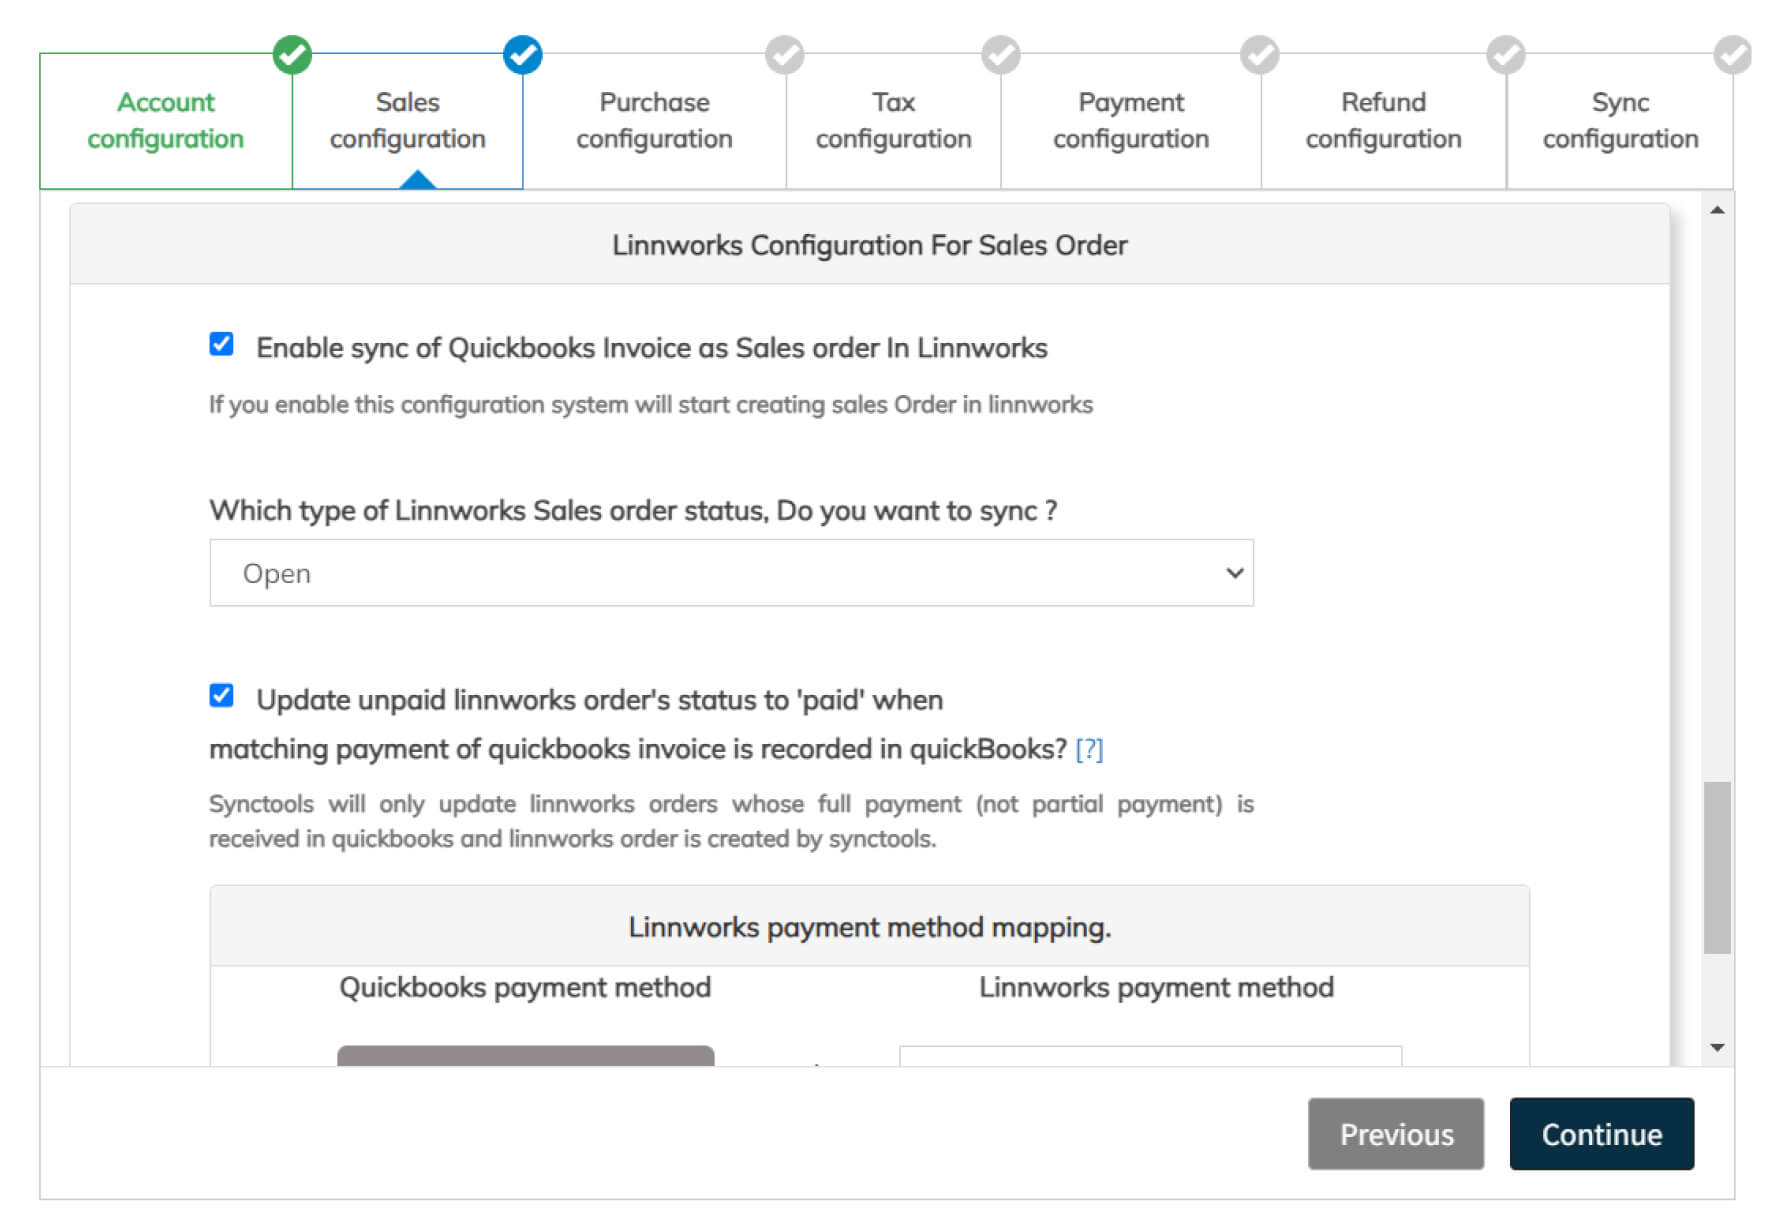 Linnworks configuration for sales orders